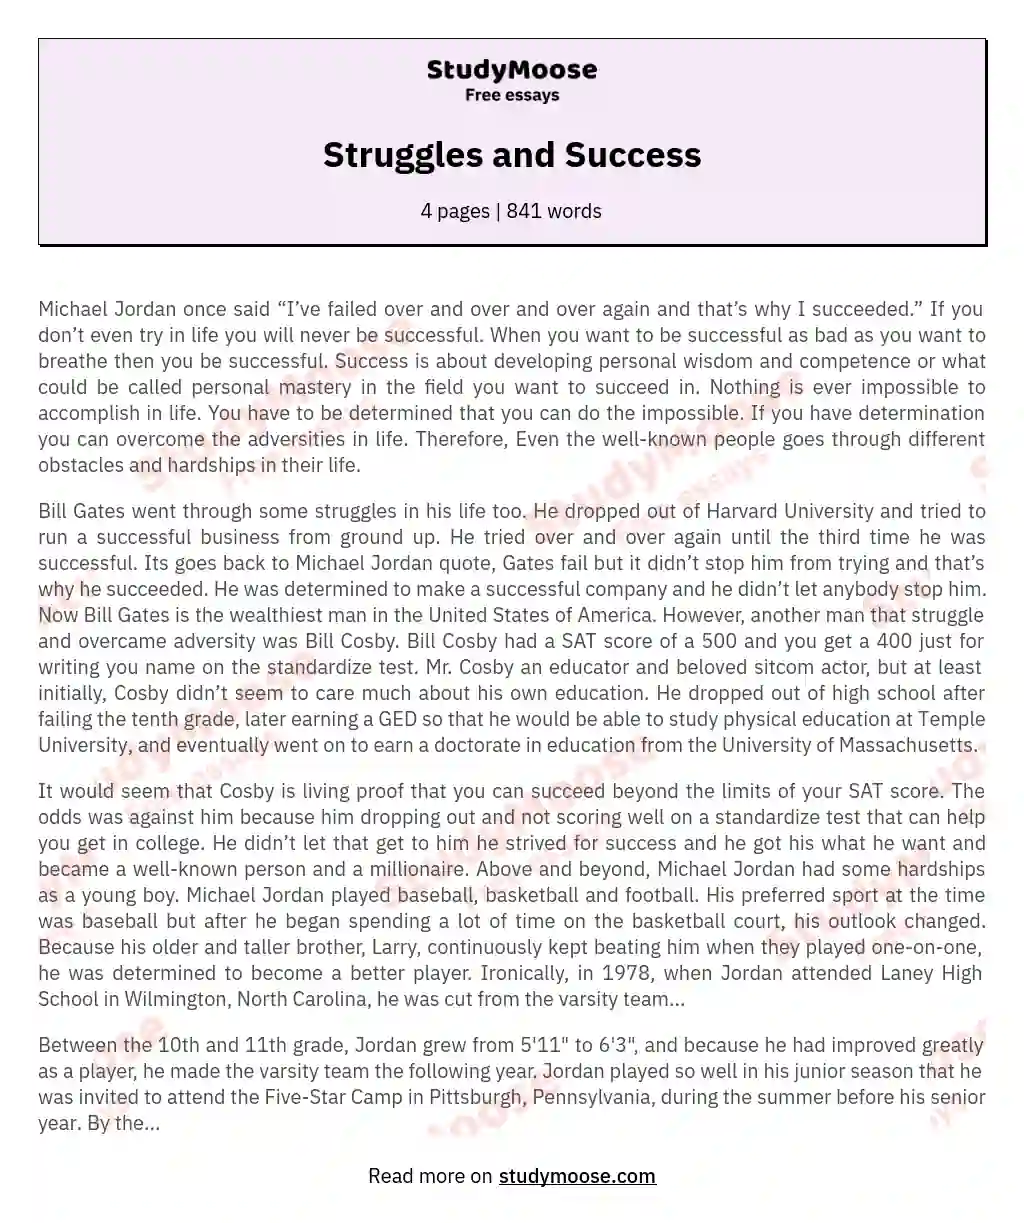 expository essay about struggles